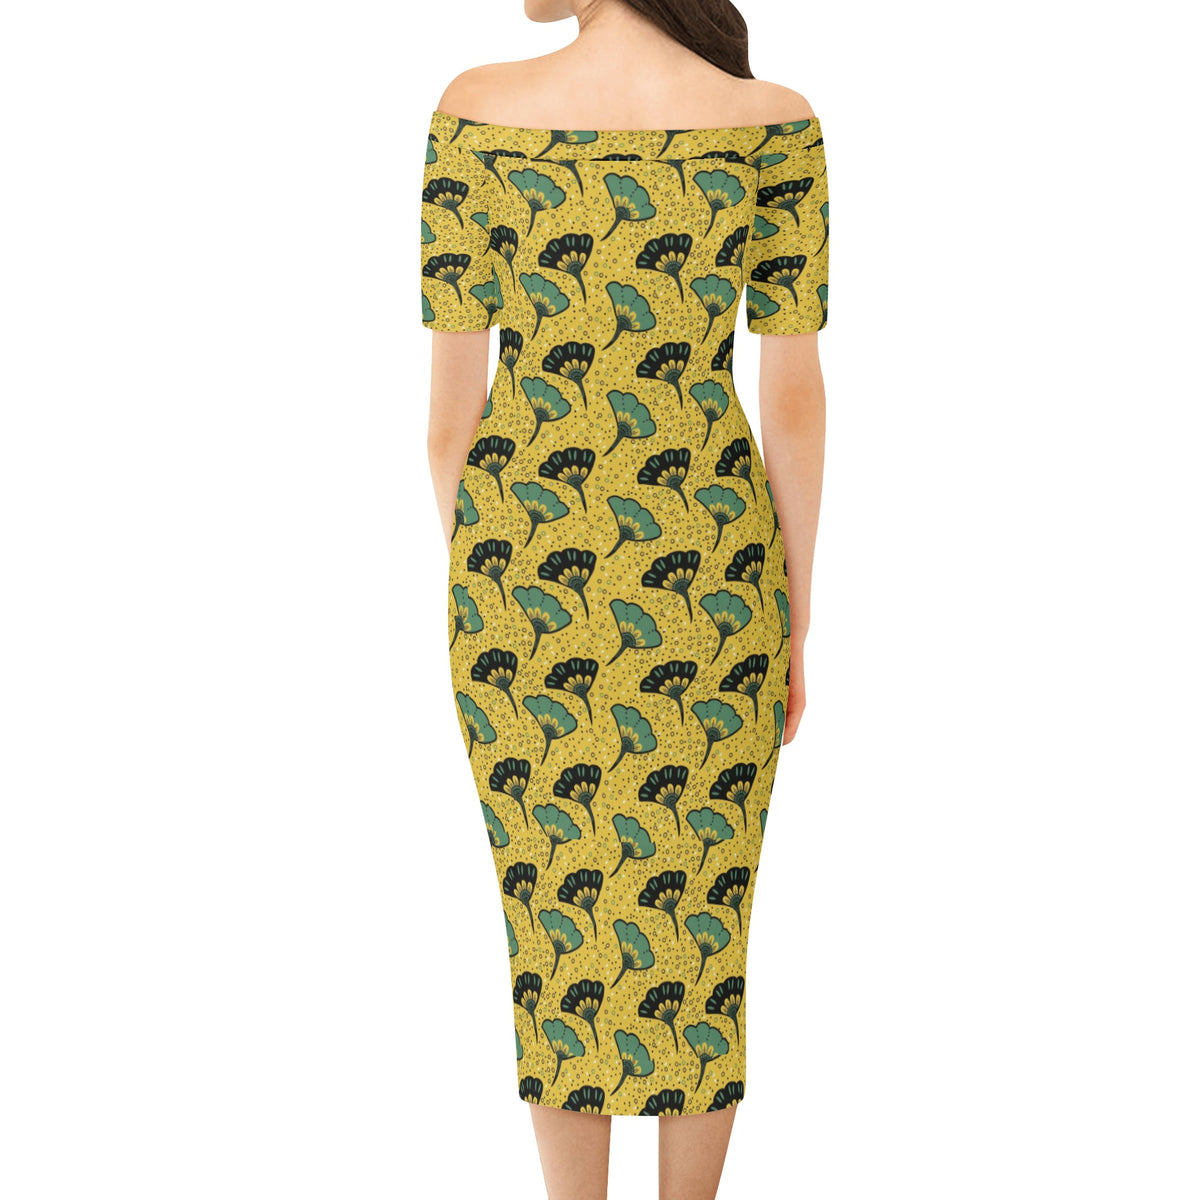 Women's Off The Shoulder Office Lady Dress Sumbu African Ankara Prints and Designs